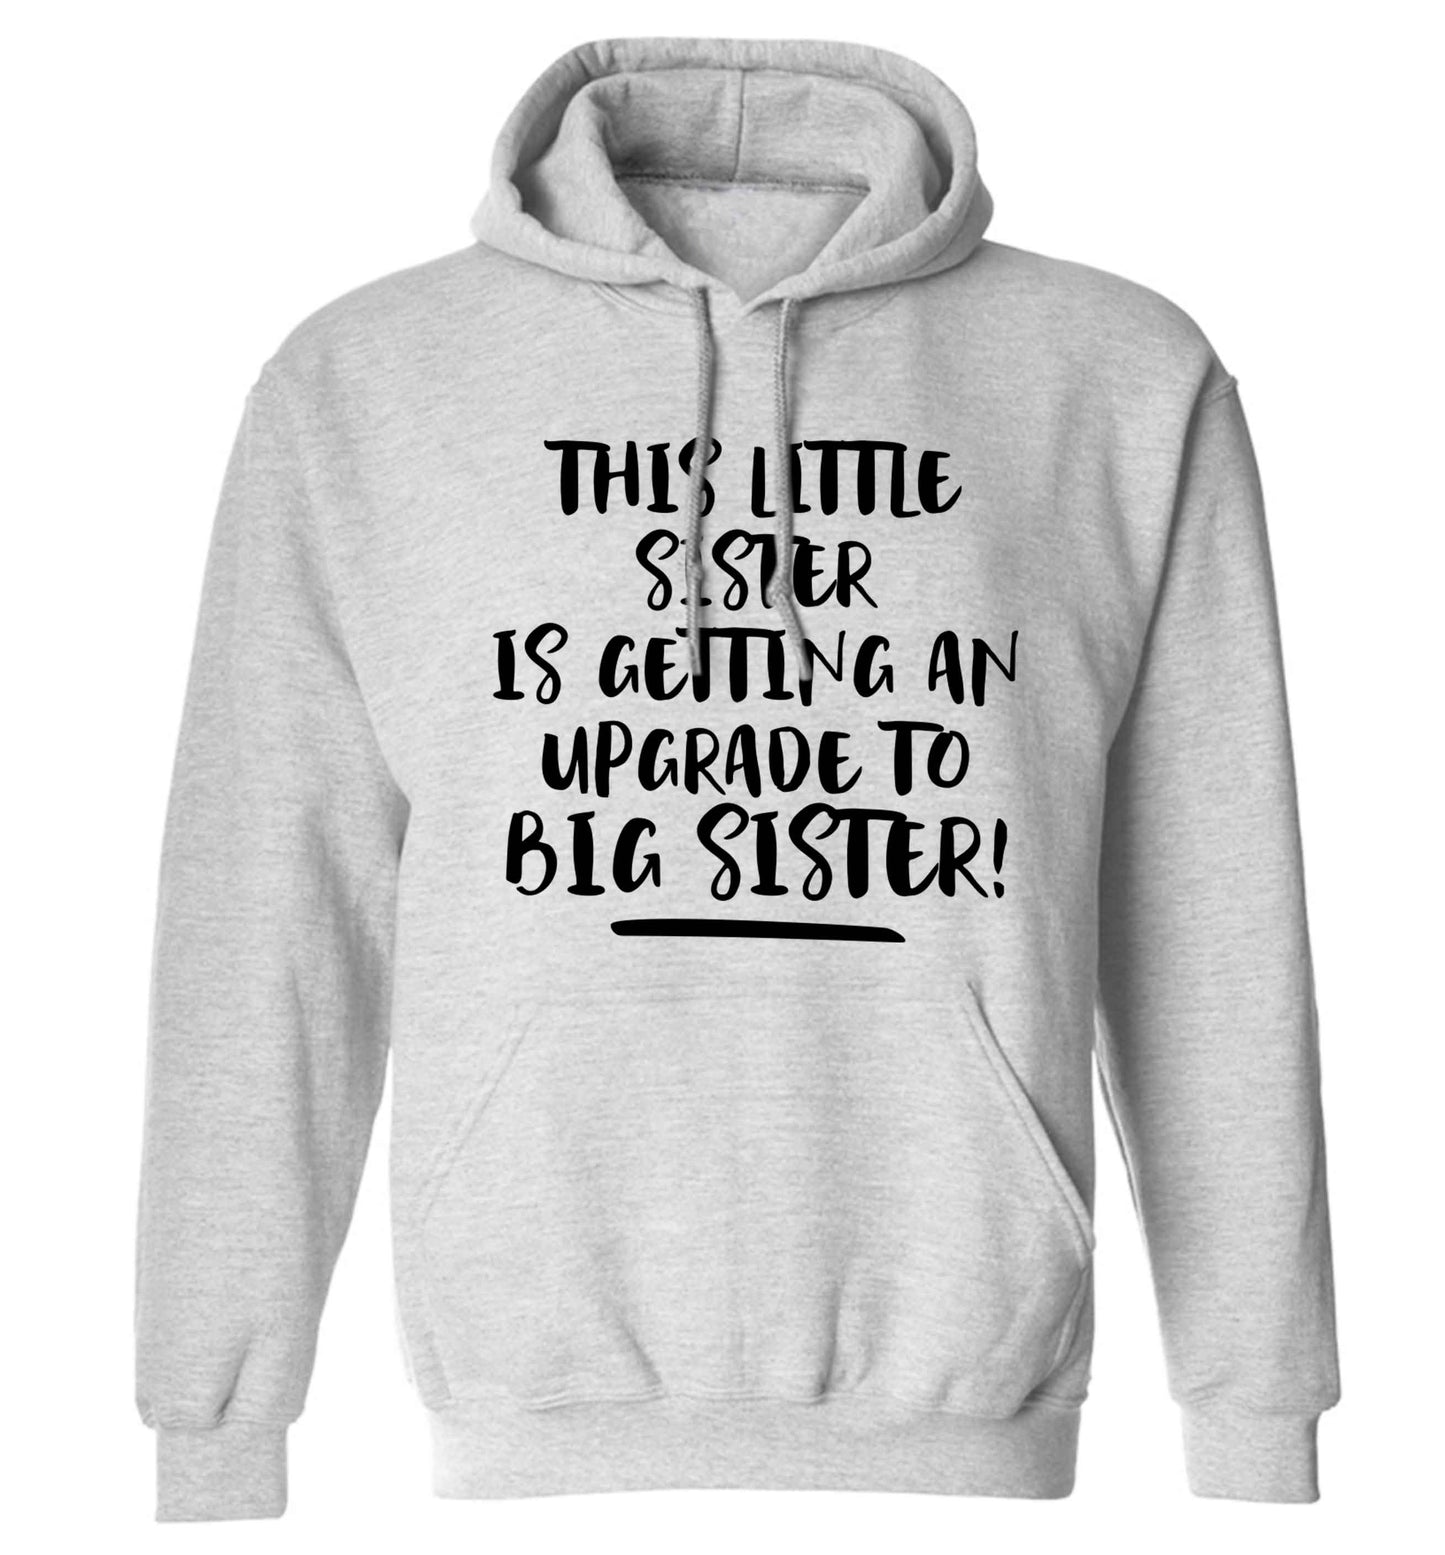 This little sister is getting an upgrade to big sister! adults unisex grey hoodie 2XL